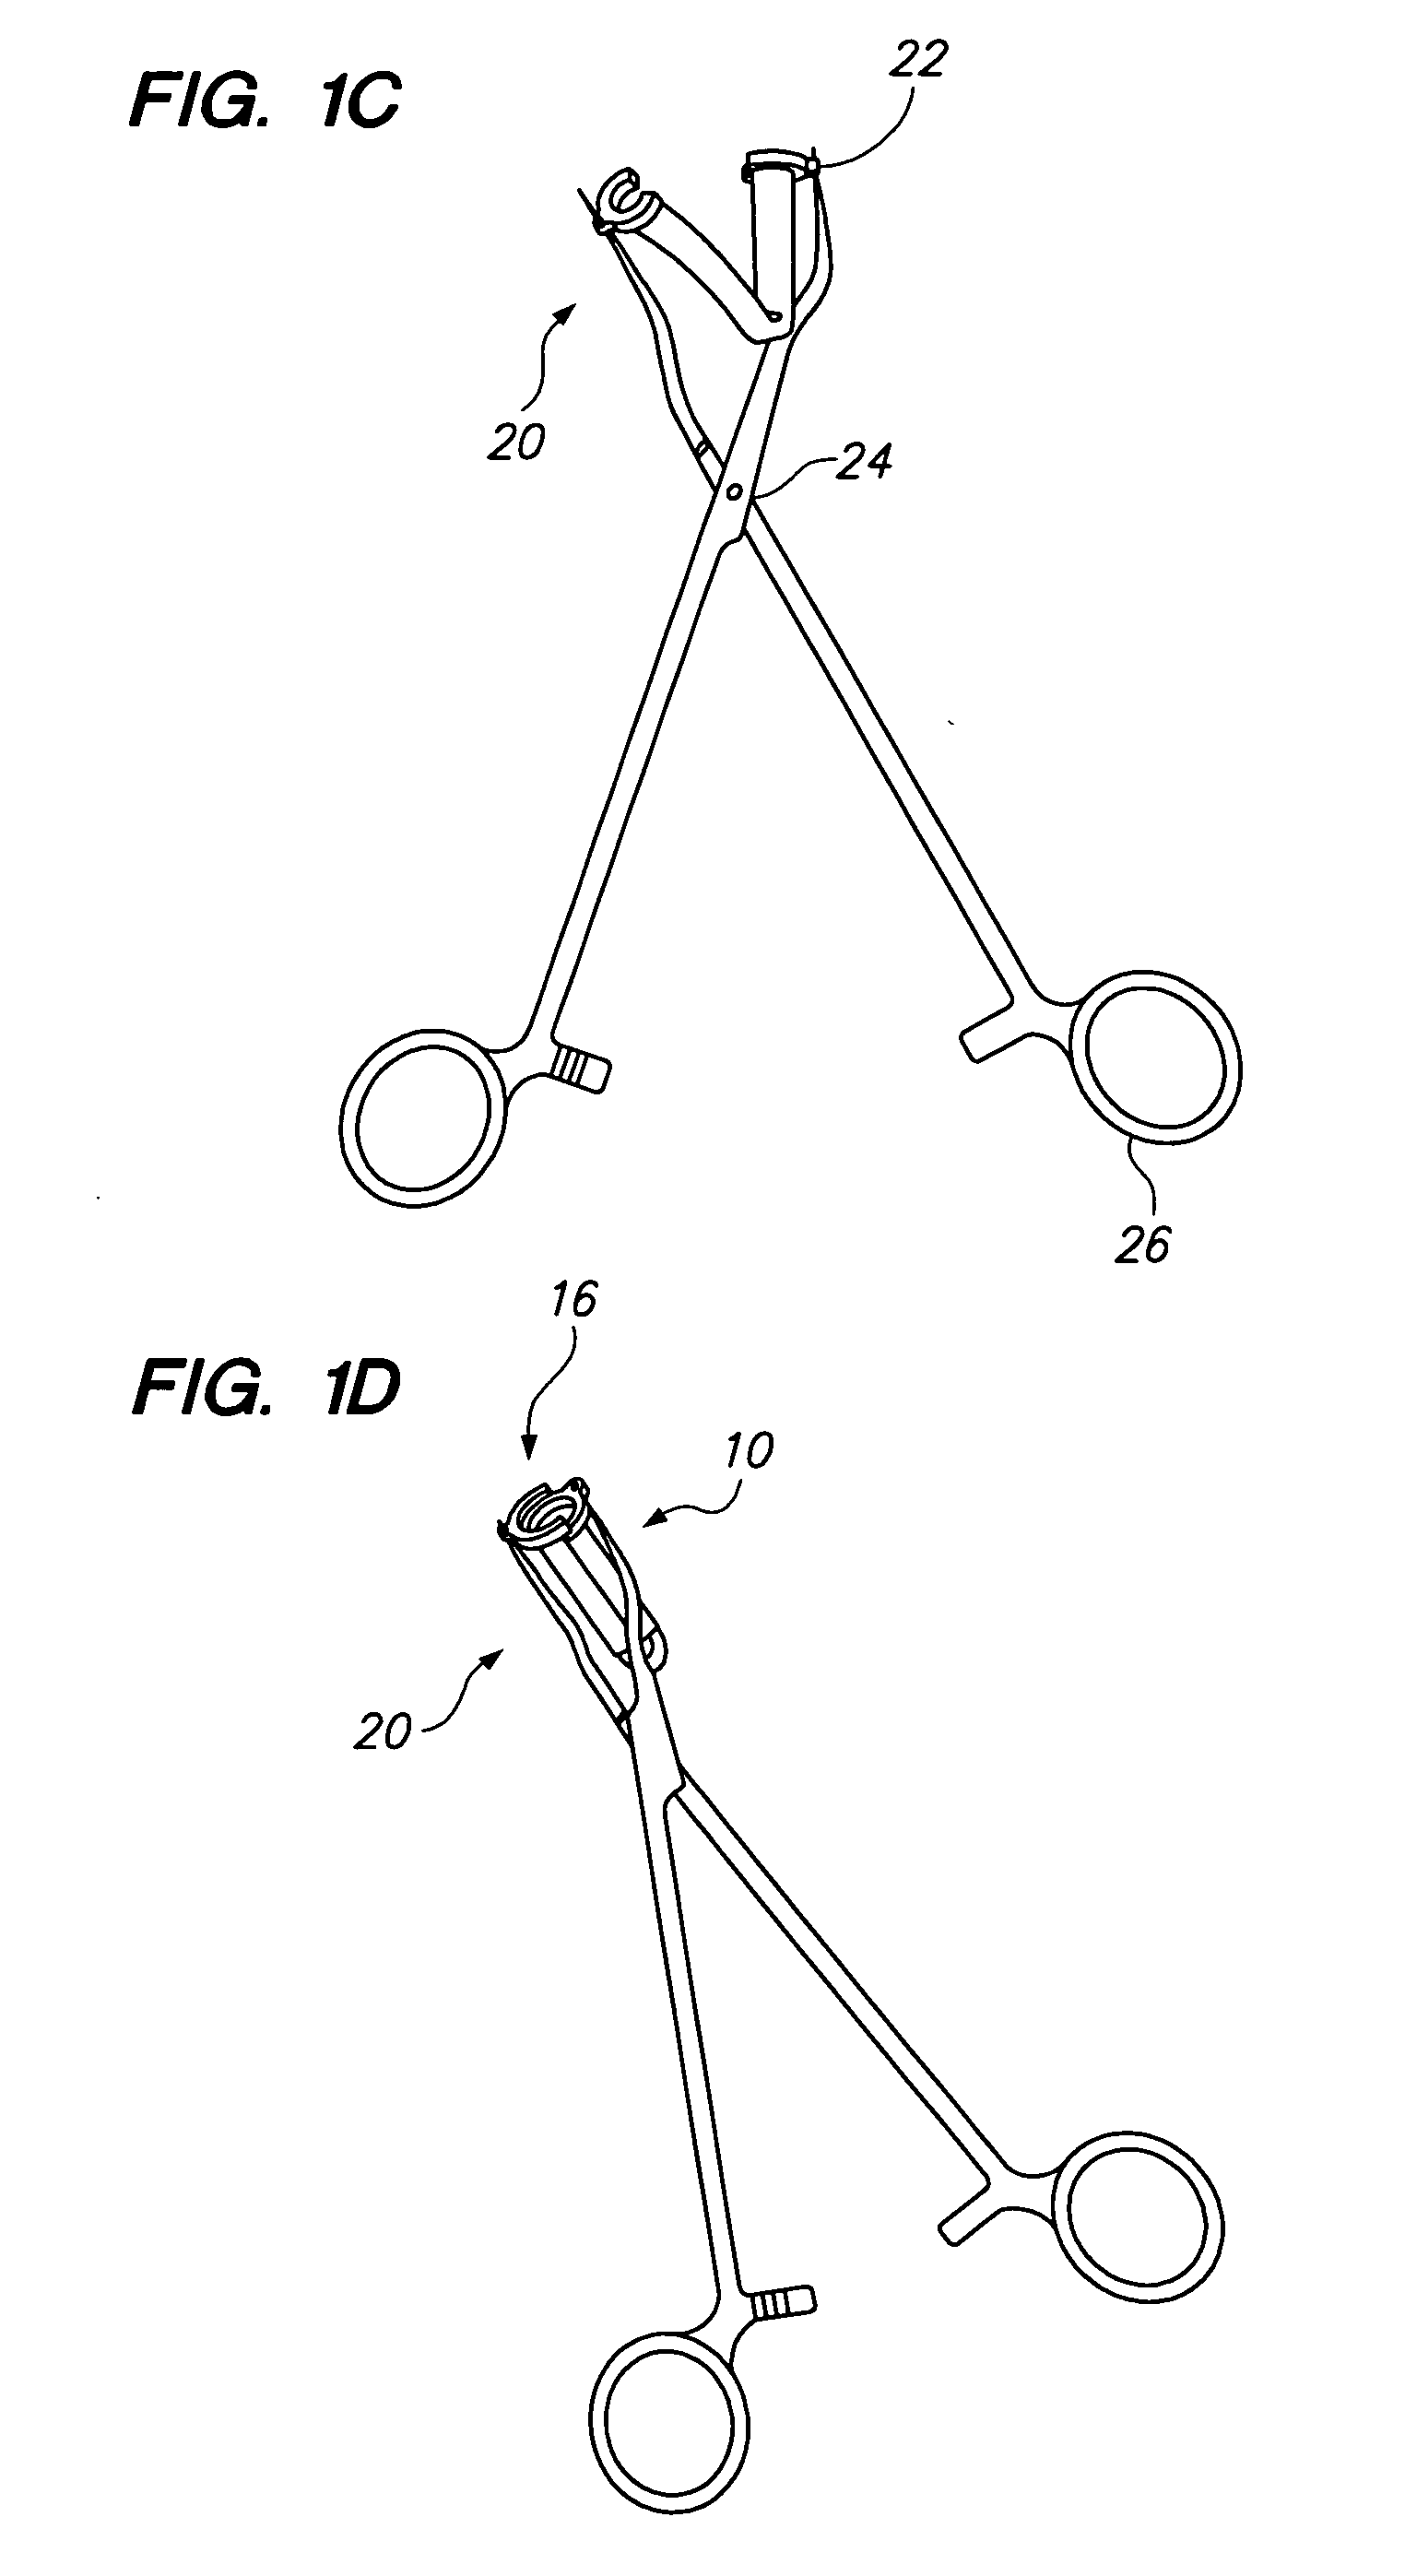 Devices and methods for atrial appendage exclusion